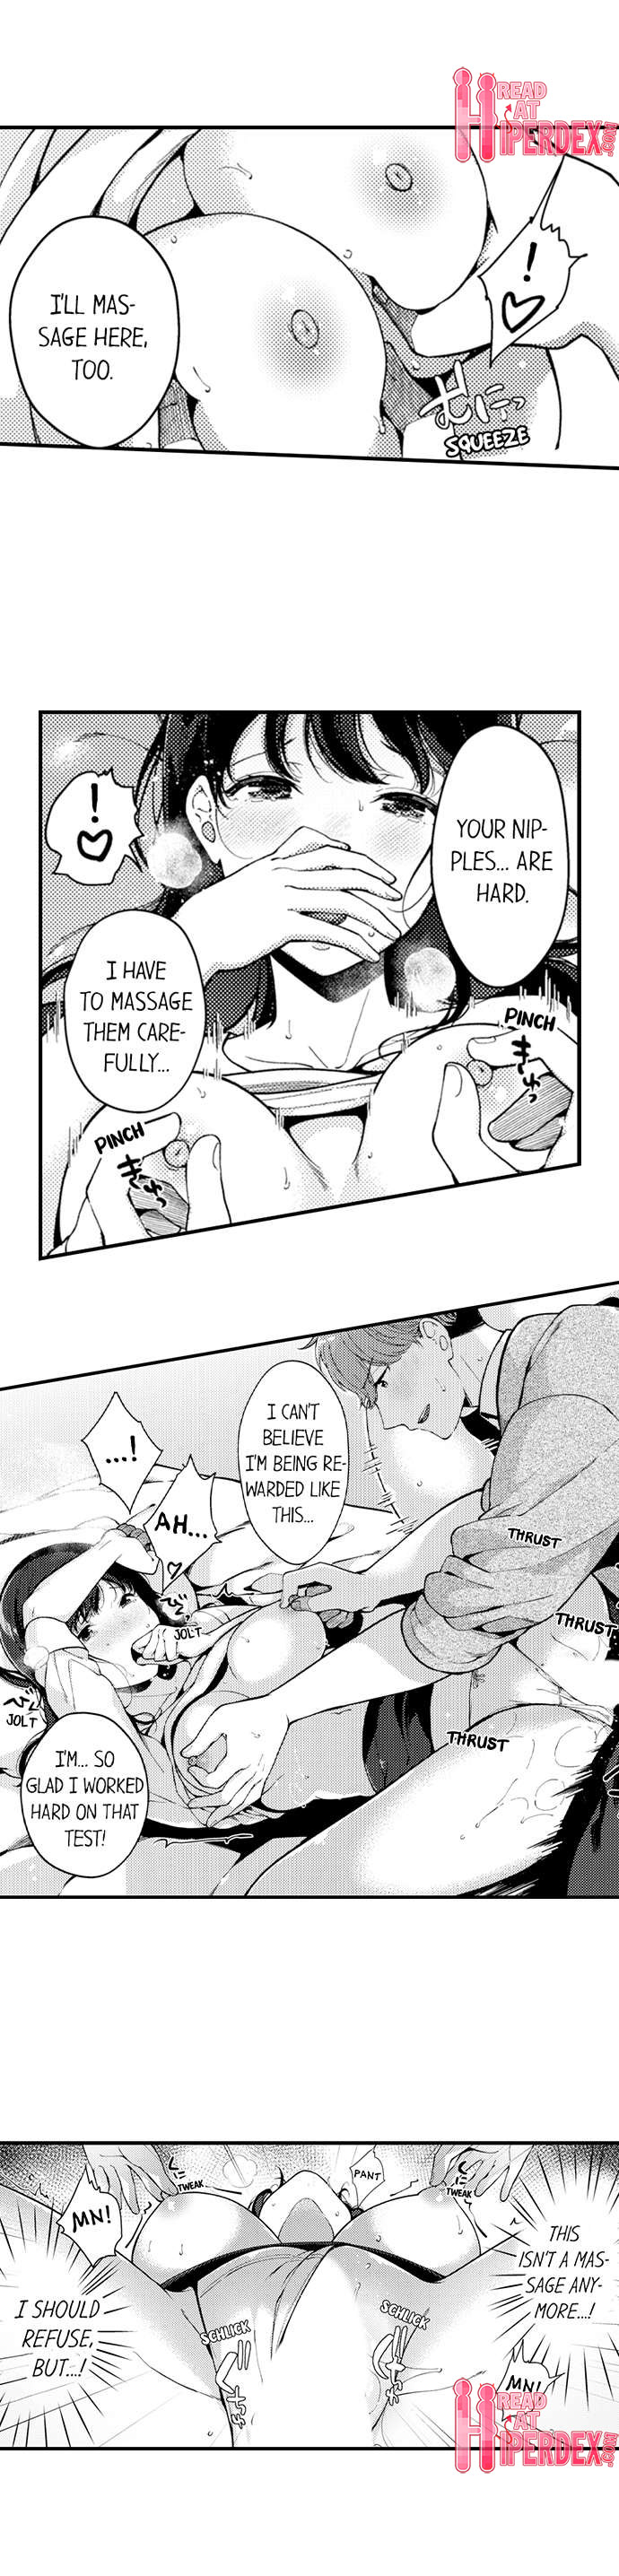 The Massage ♂♀ The Pleasure of Full Course Sex Chapter 6 - Page 8